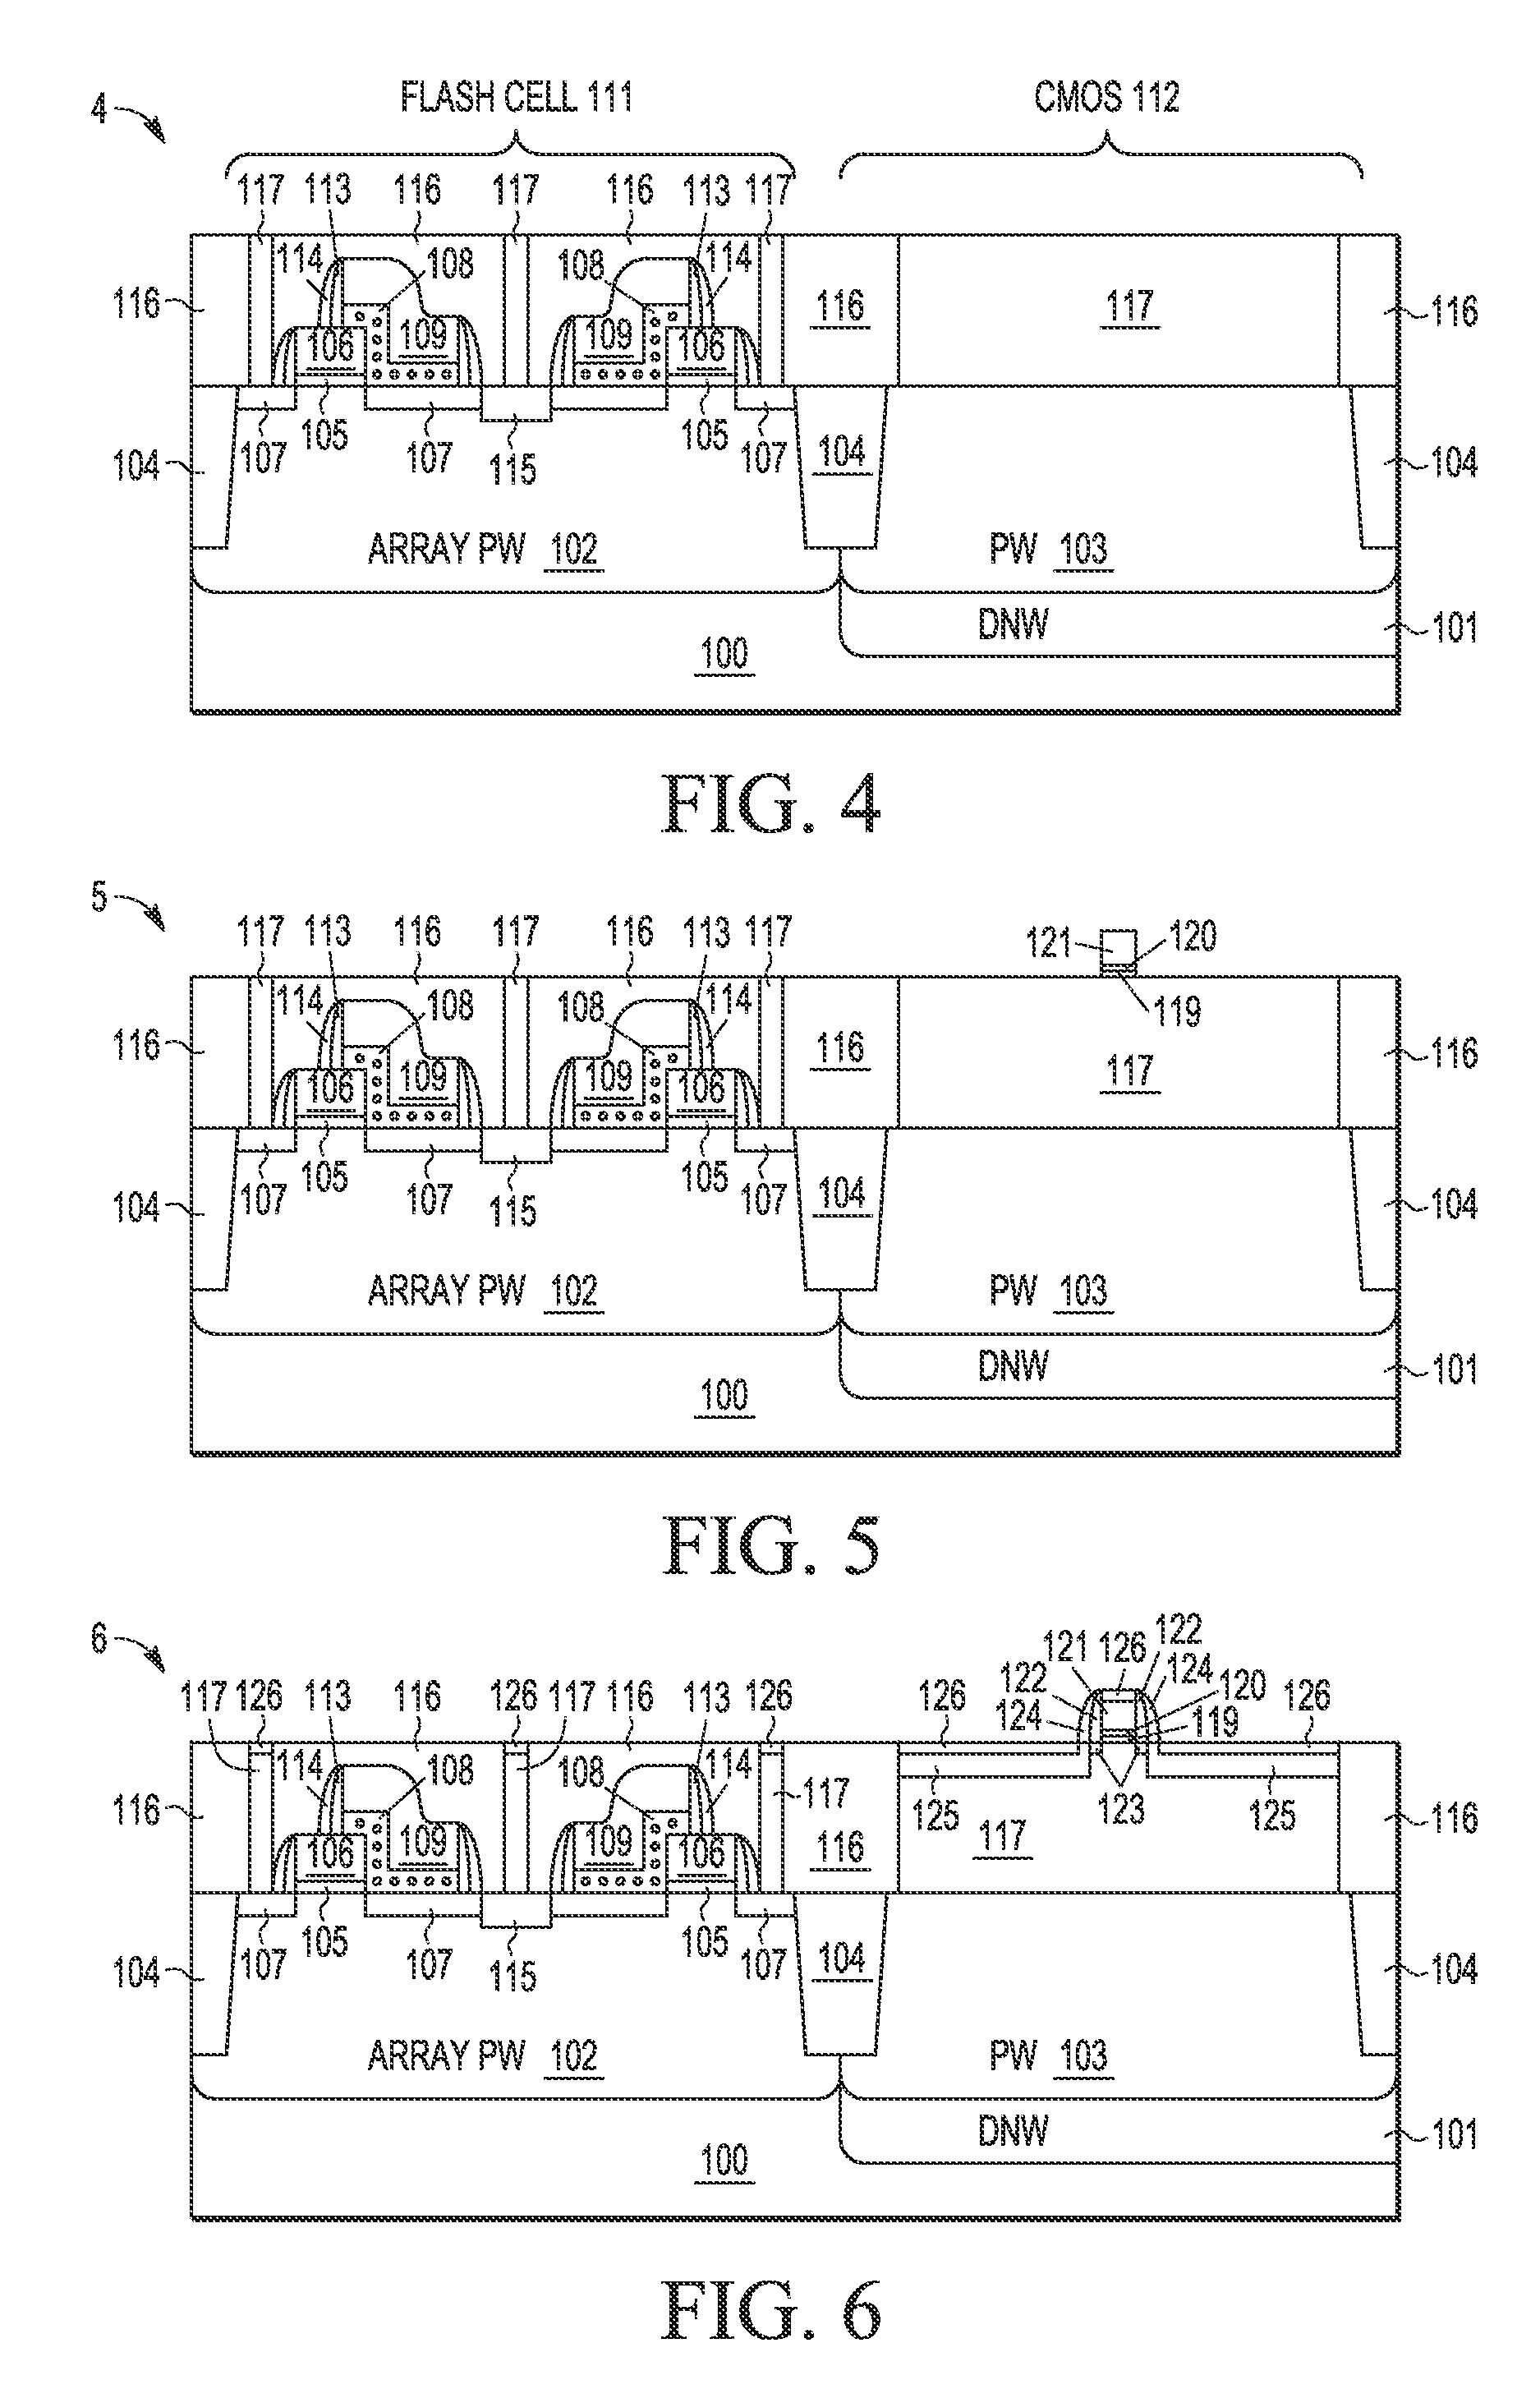 Method to form a polysilicon nanocrystal thin film storage bitcell within a high k metal gate platform technology using a gate last process to form transistor gates